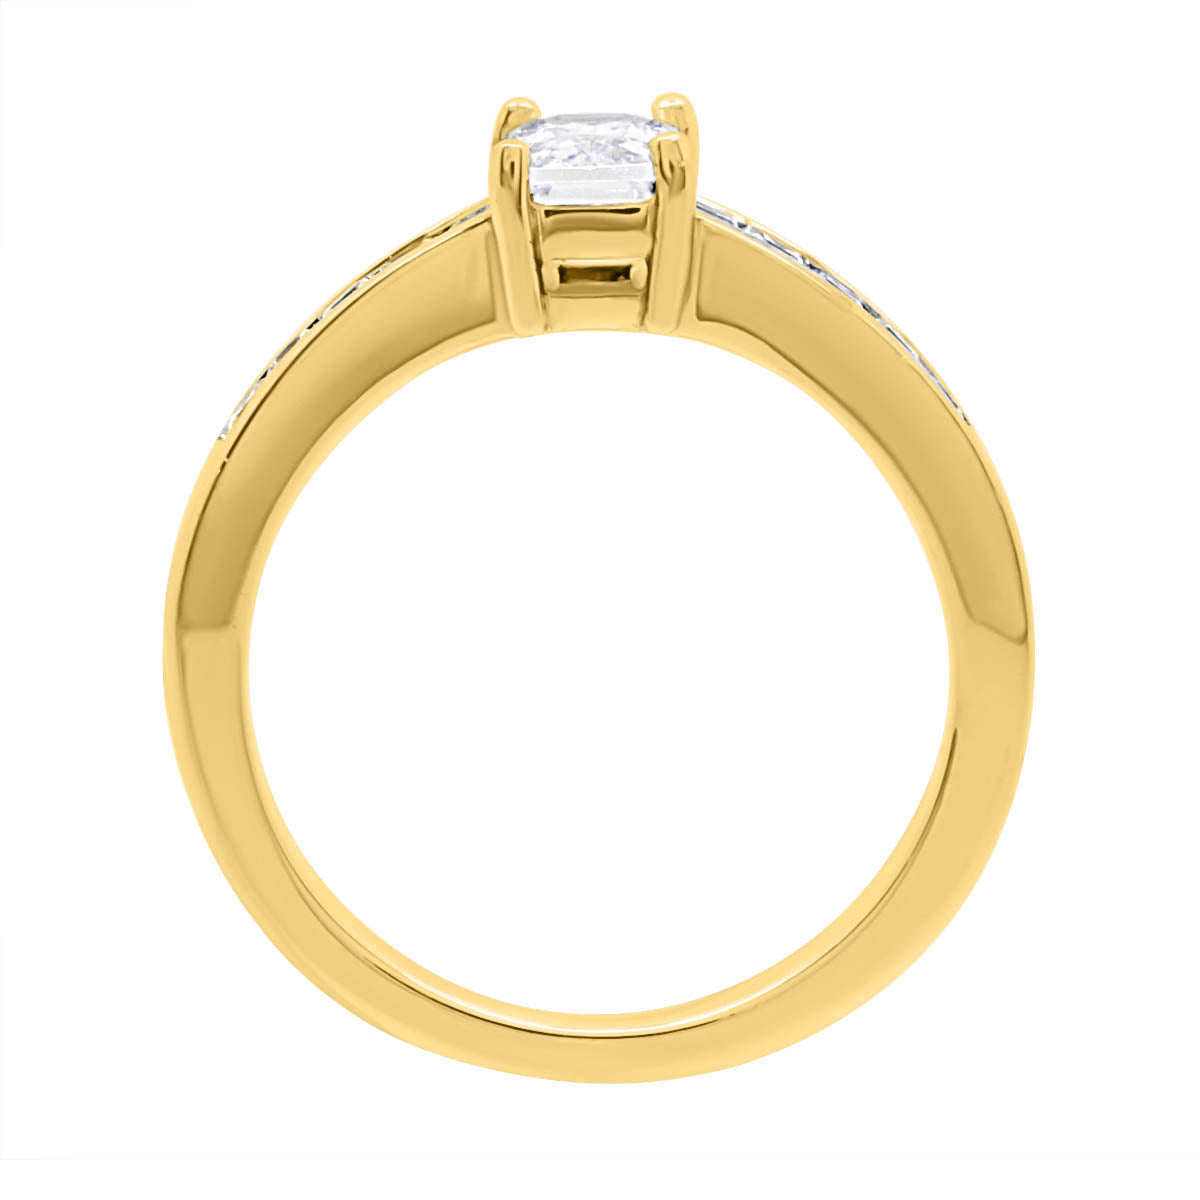 Radiant Cut Engagement Ring in yellow gold standing verticaly